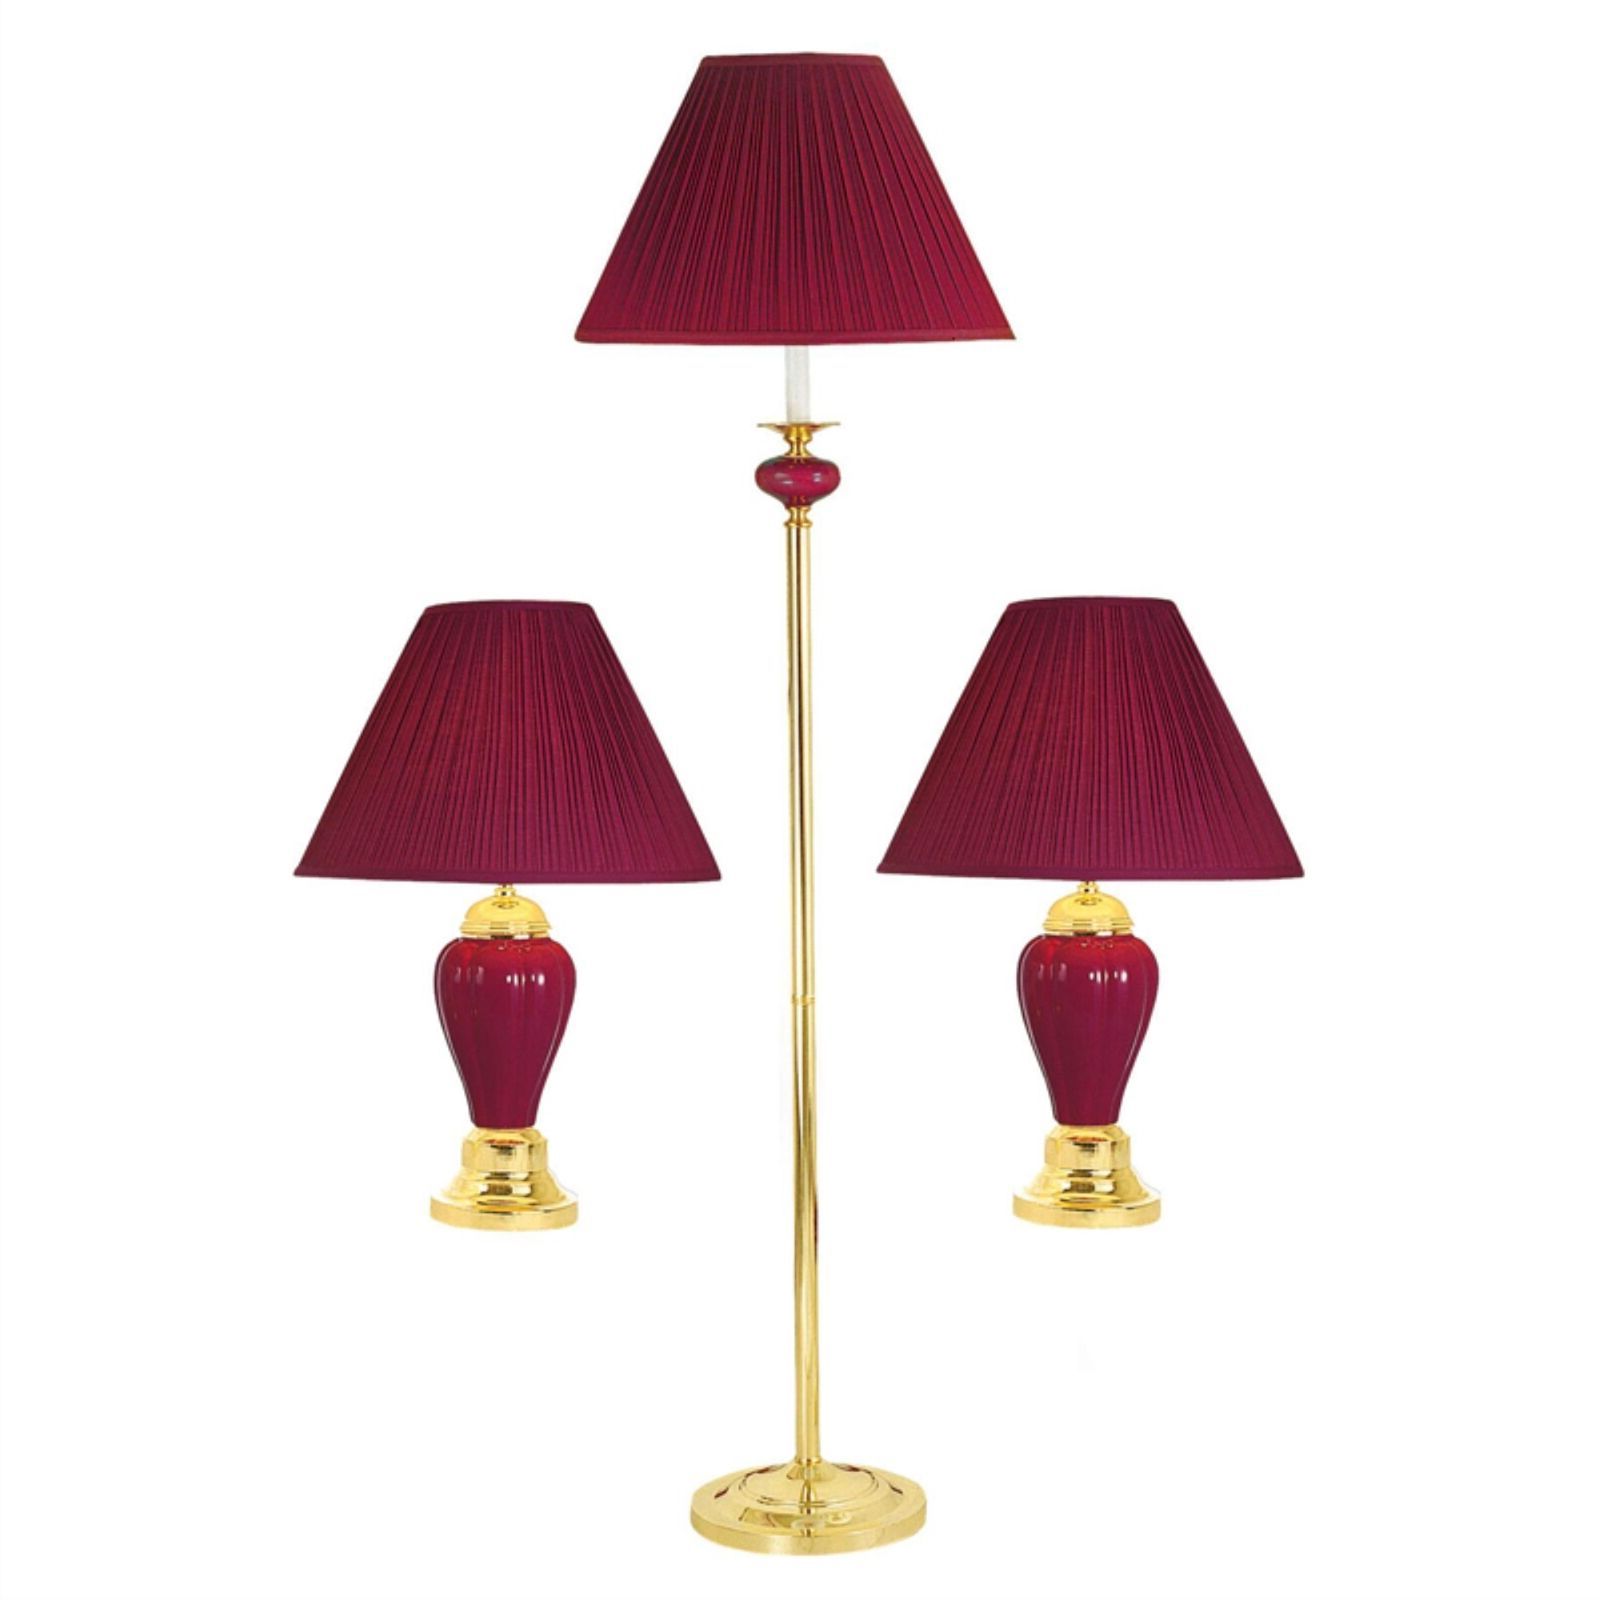 3 Piece Ceramic Lamp Set, Floor And Table Lamps, Burgundy Finish | Ebay With Regard To 3 Piece Setfloor Lamps (View 3 of 20)